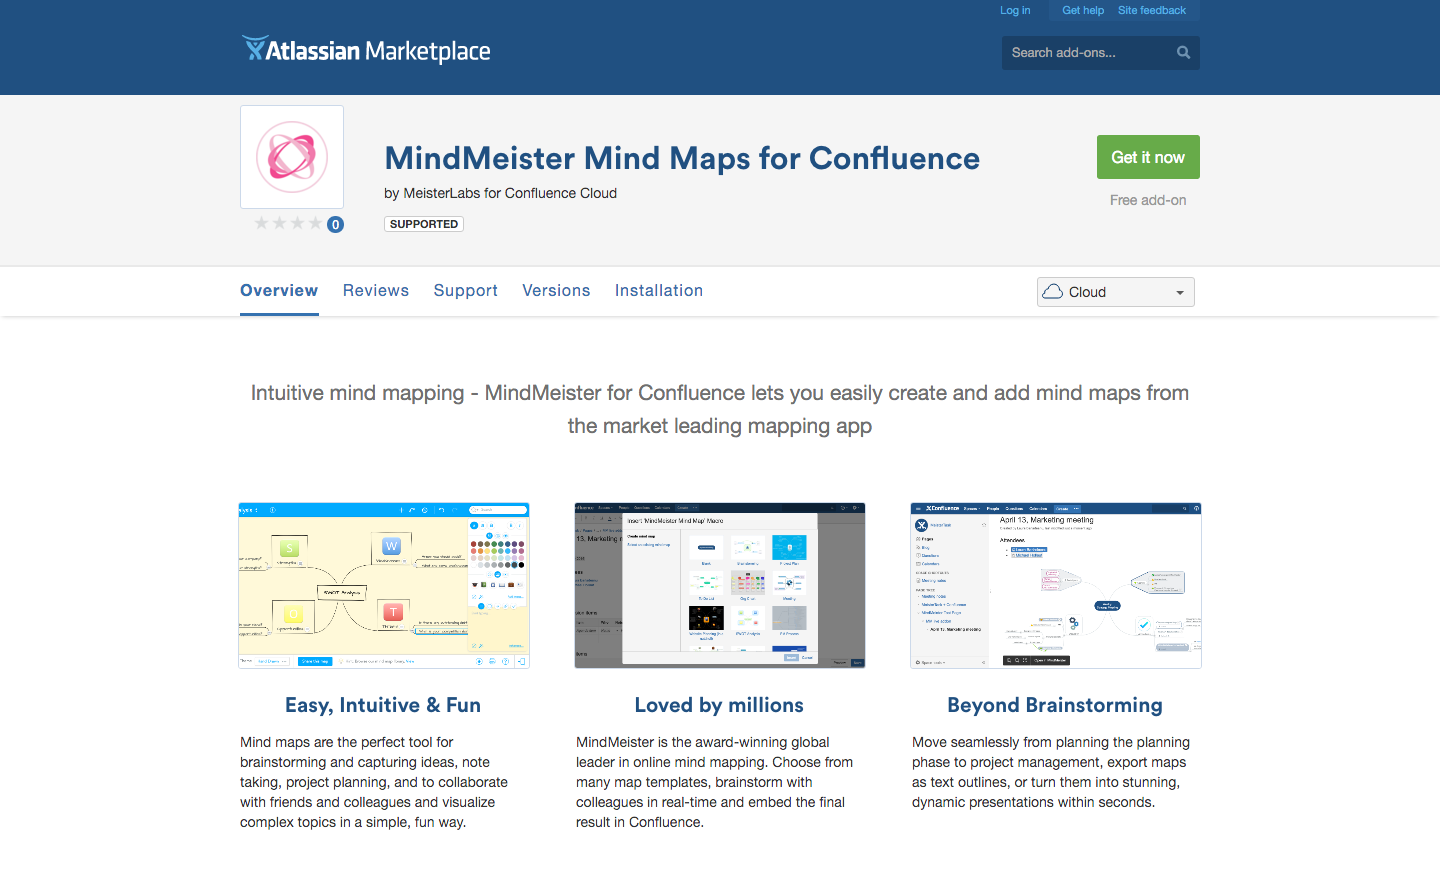 Get MindMeister in the Atlassian Marketplace